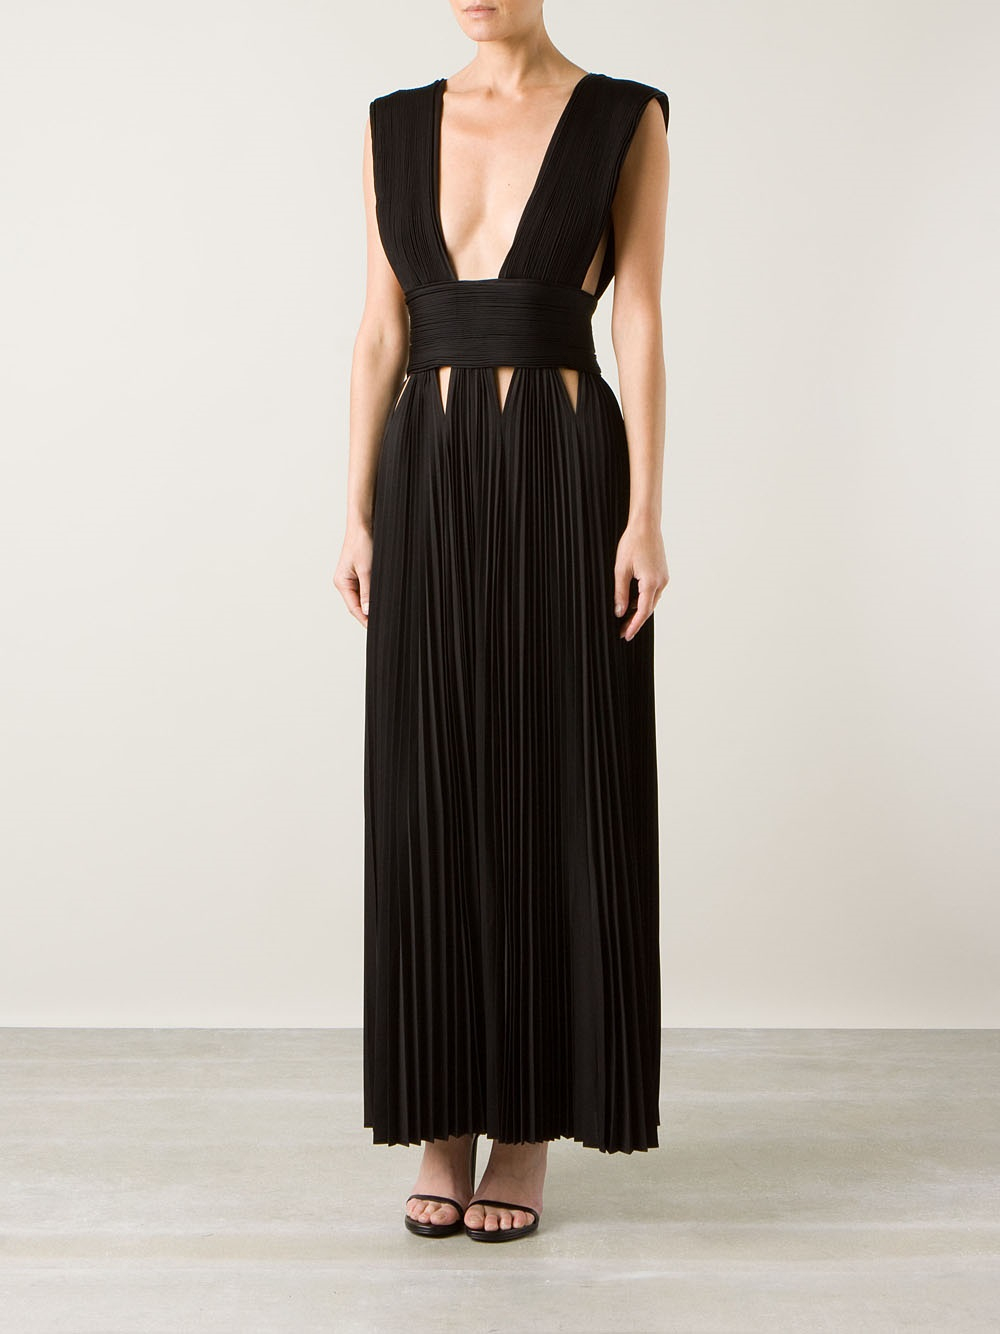 Givenchy Pleated Maxi Dress in Black | Lyst